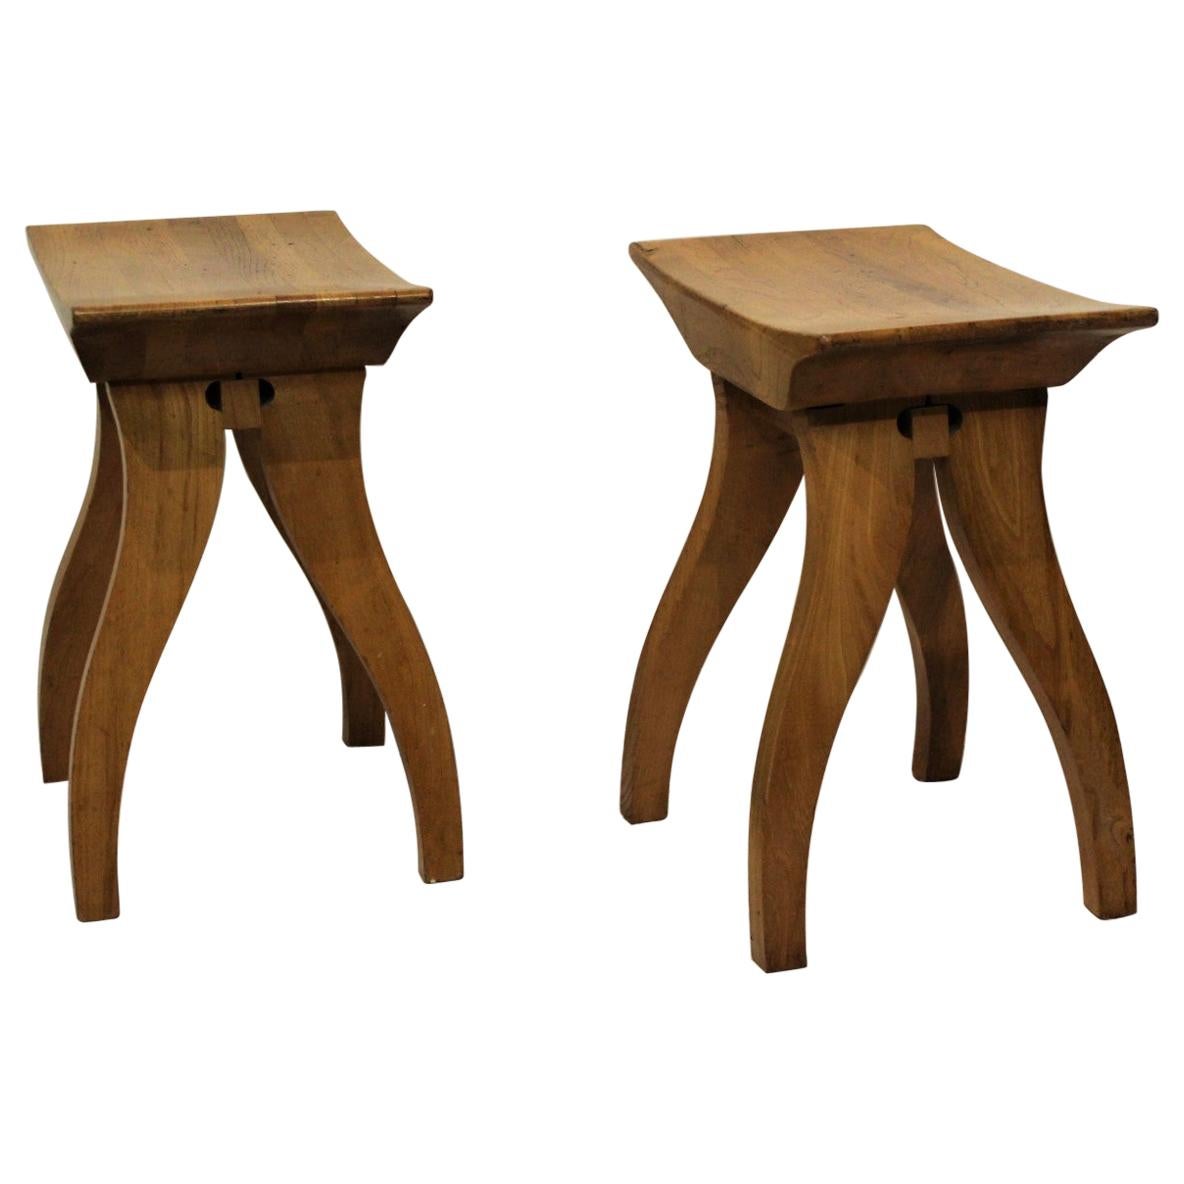 Pair of Arts & Crafts Style Wooden Stools